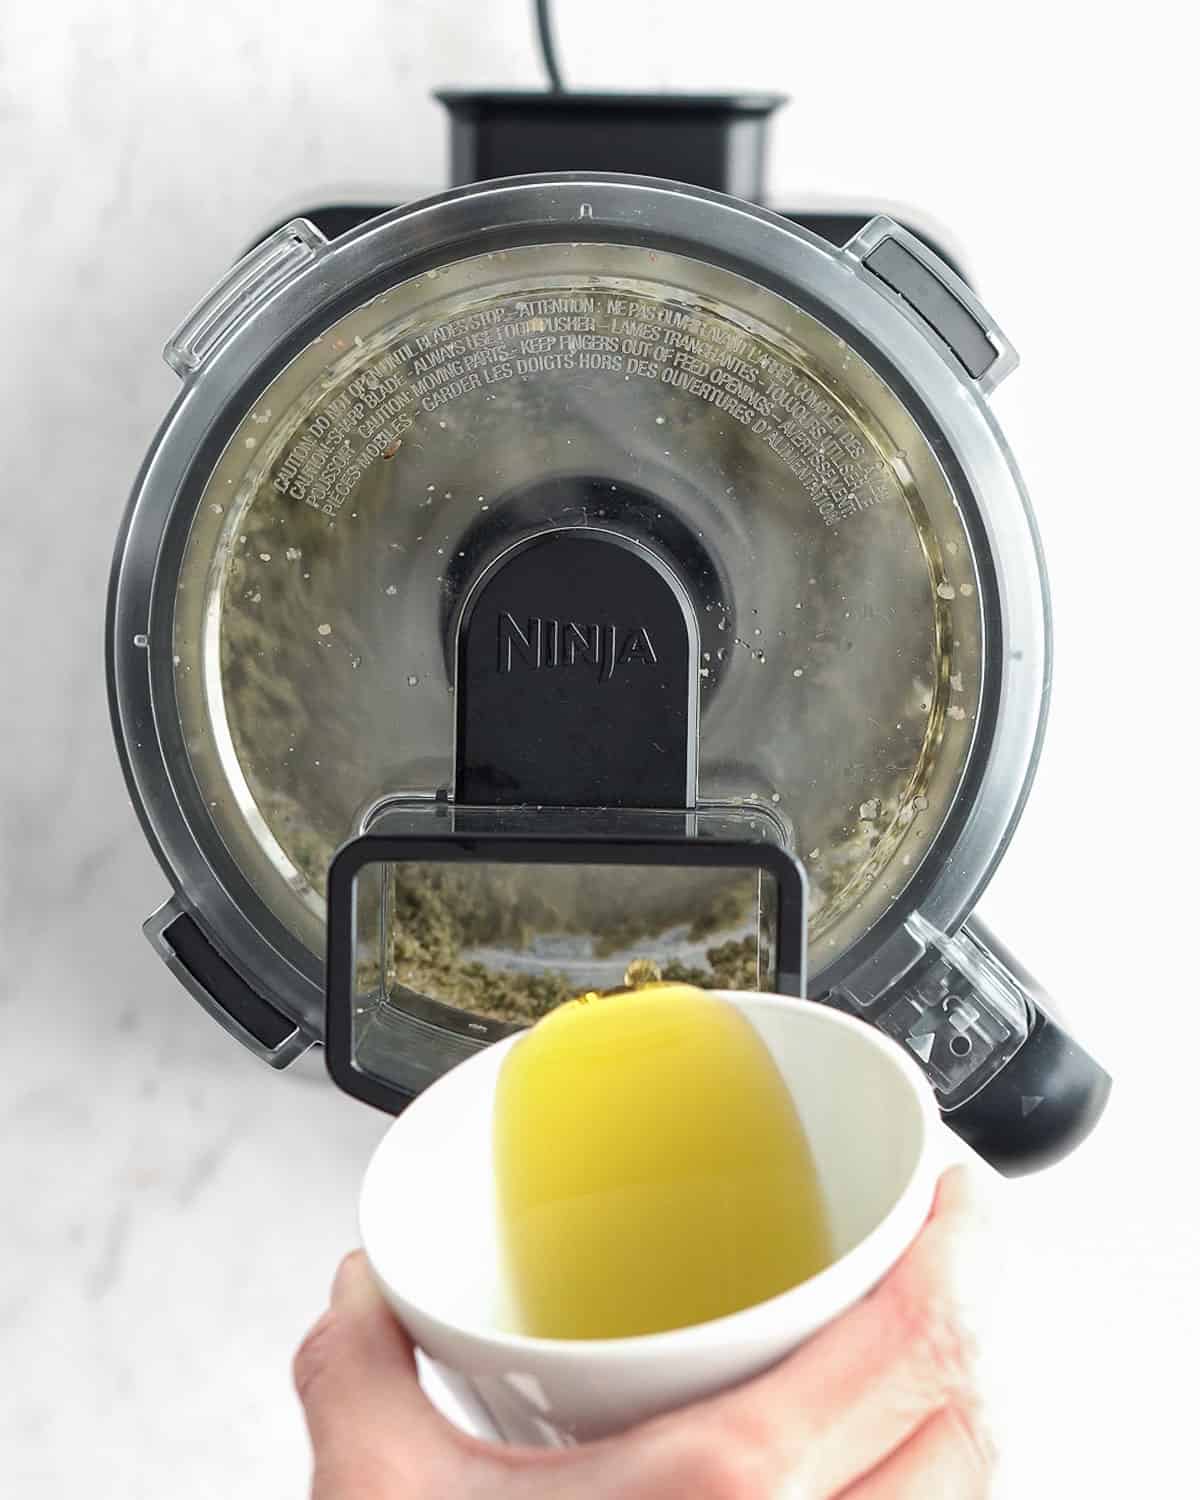 olive oil being poured into food proseccor while blending.